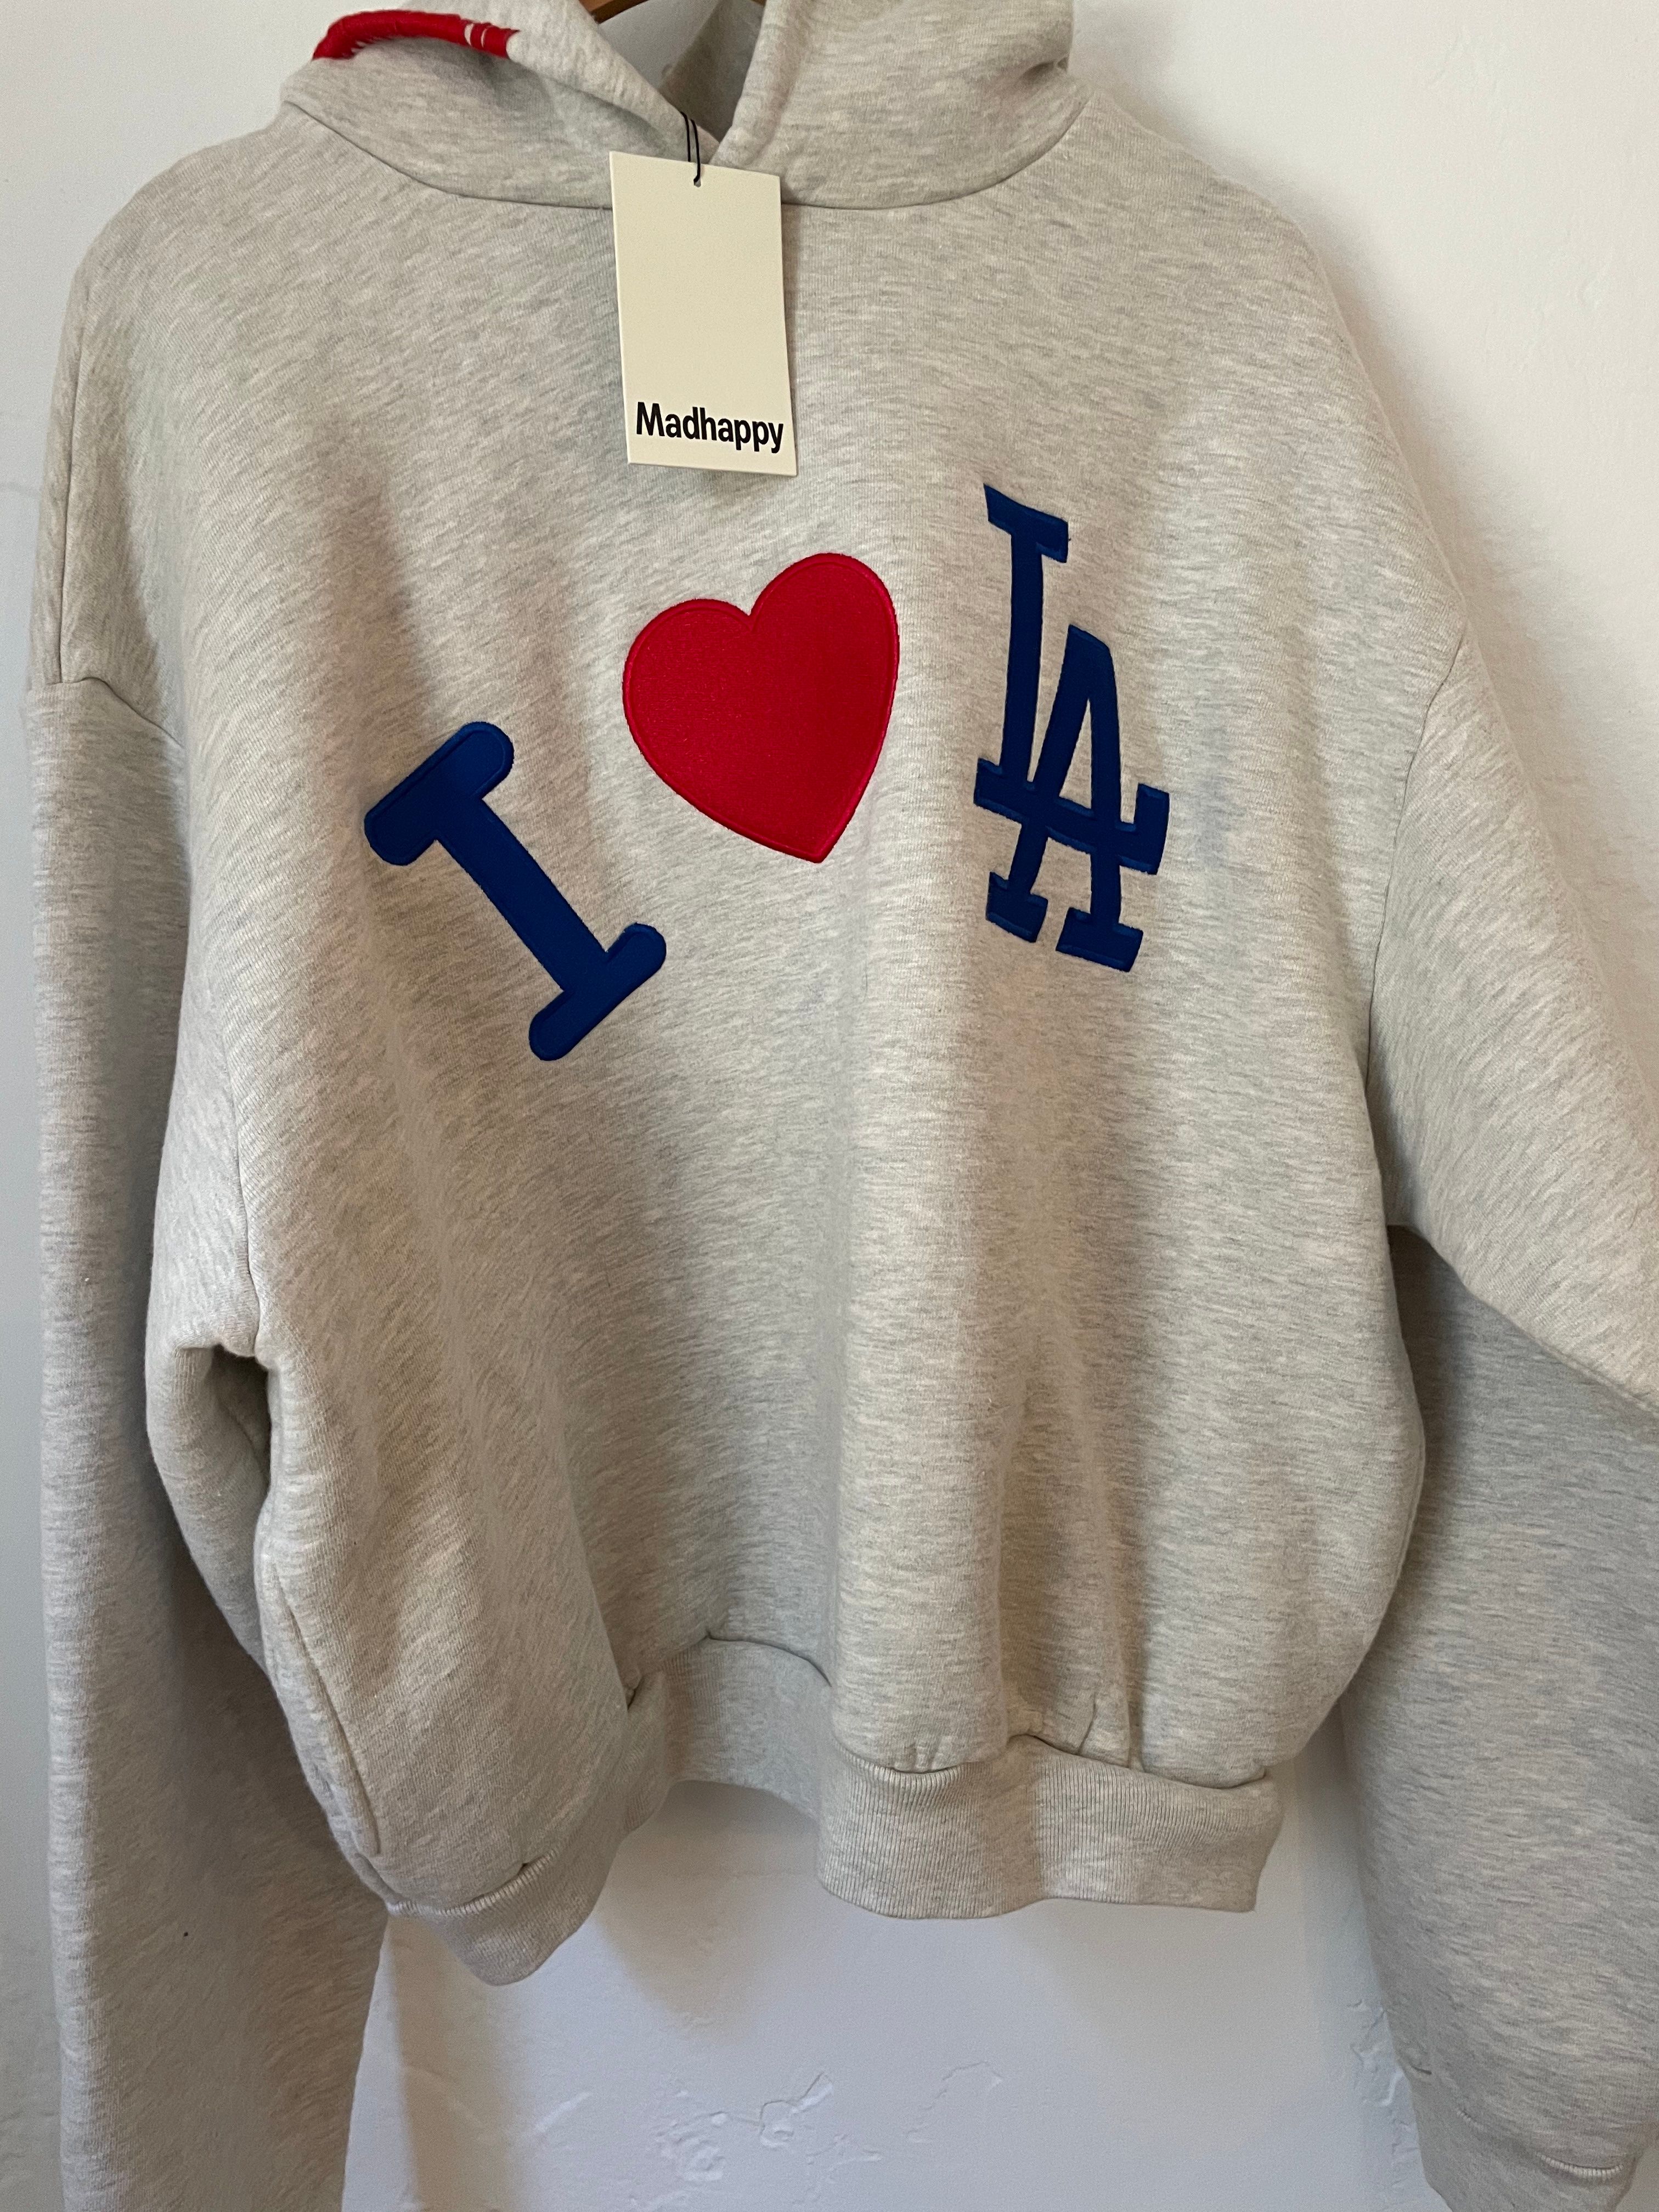 Madhappy Los Angeles Dodgers x MadHappy SIDE POCKET HERITAGE HOODIE Size US M / EU 48-50 / 2 - 1 Preview